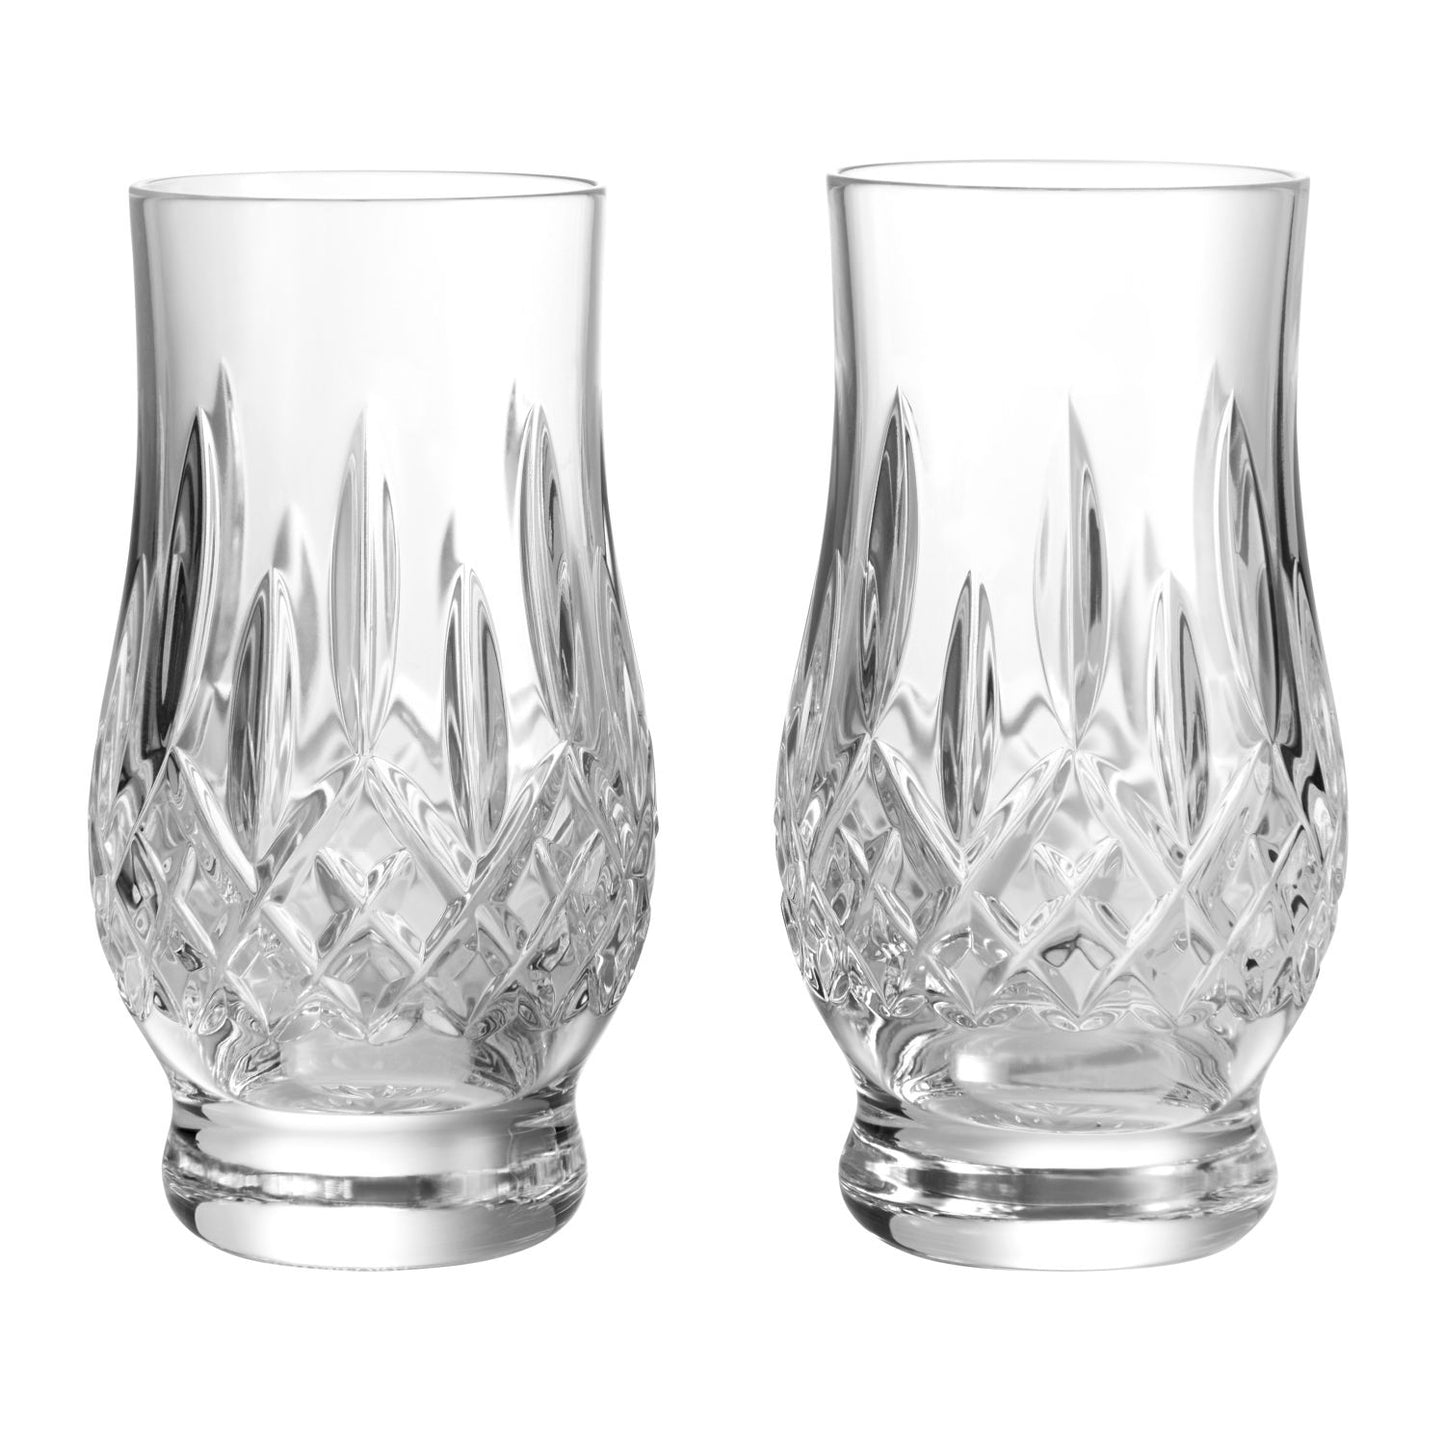 Waterford Connoisseur Lismore Footed Tumbler 180ml 6floz, Set of 2